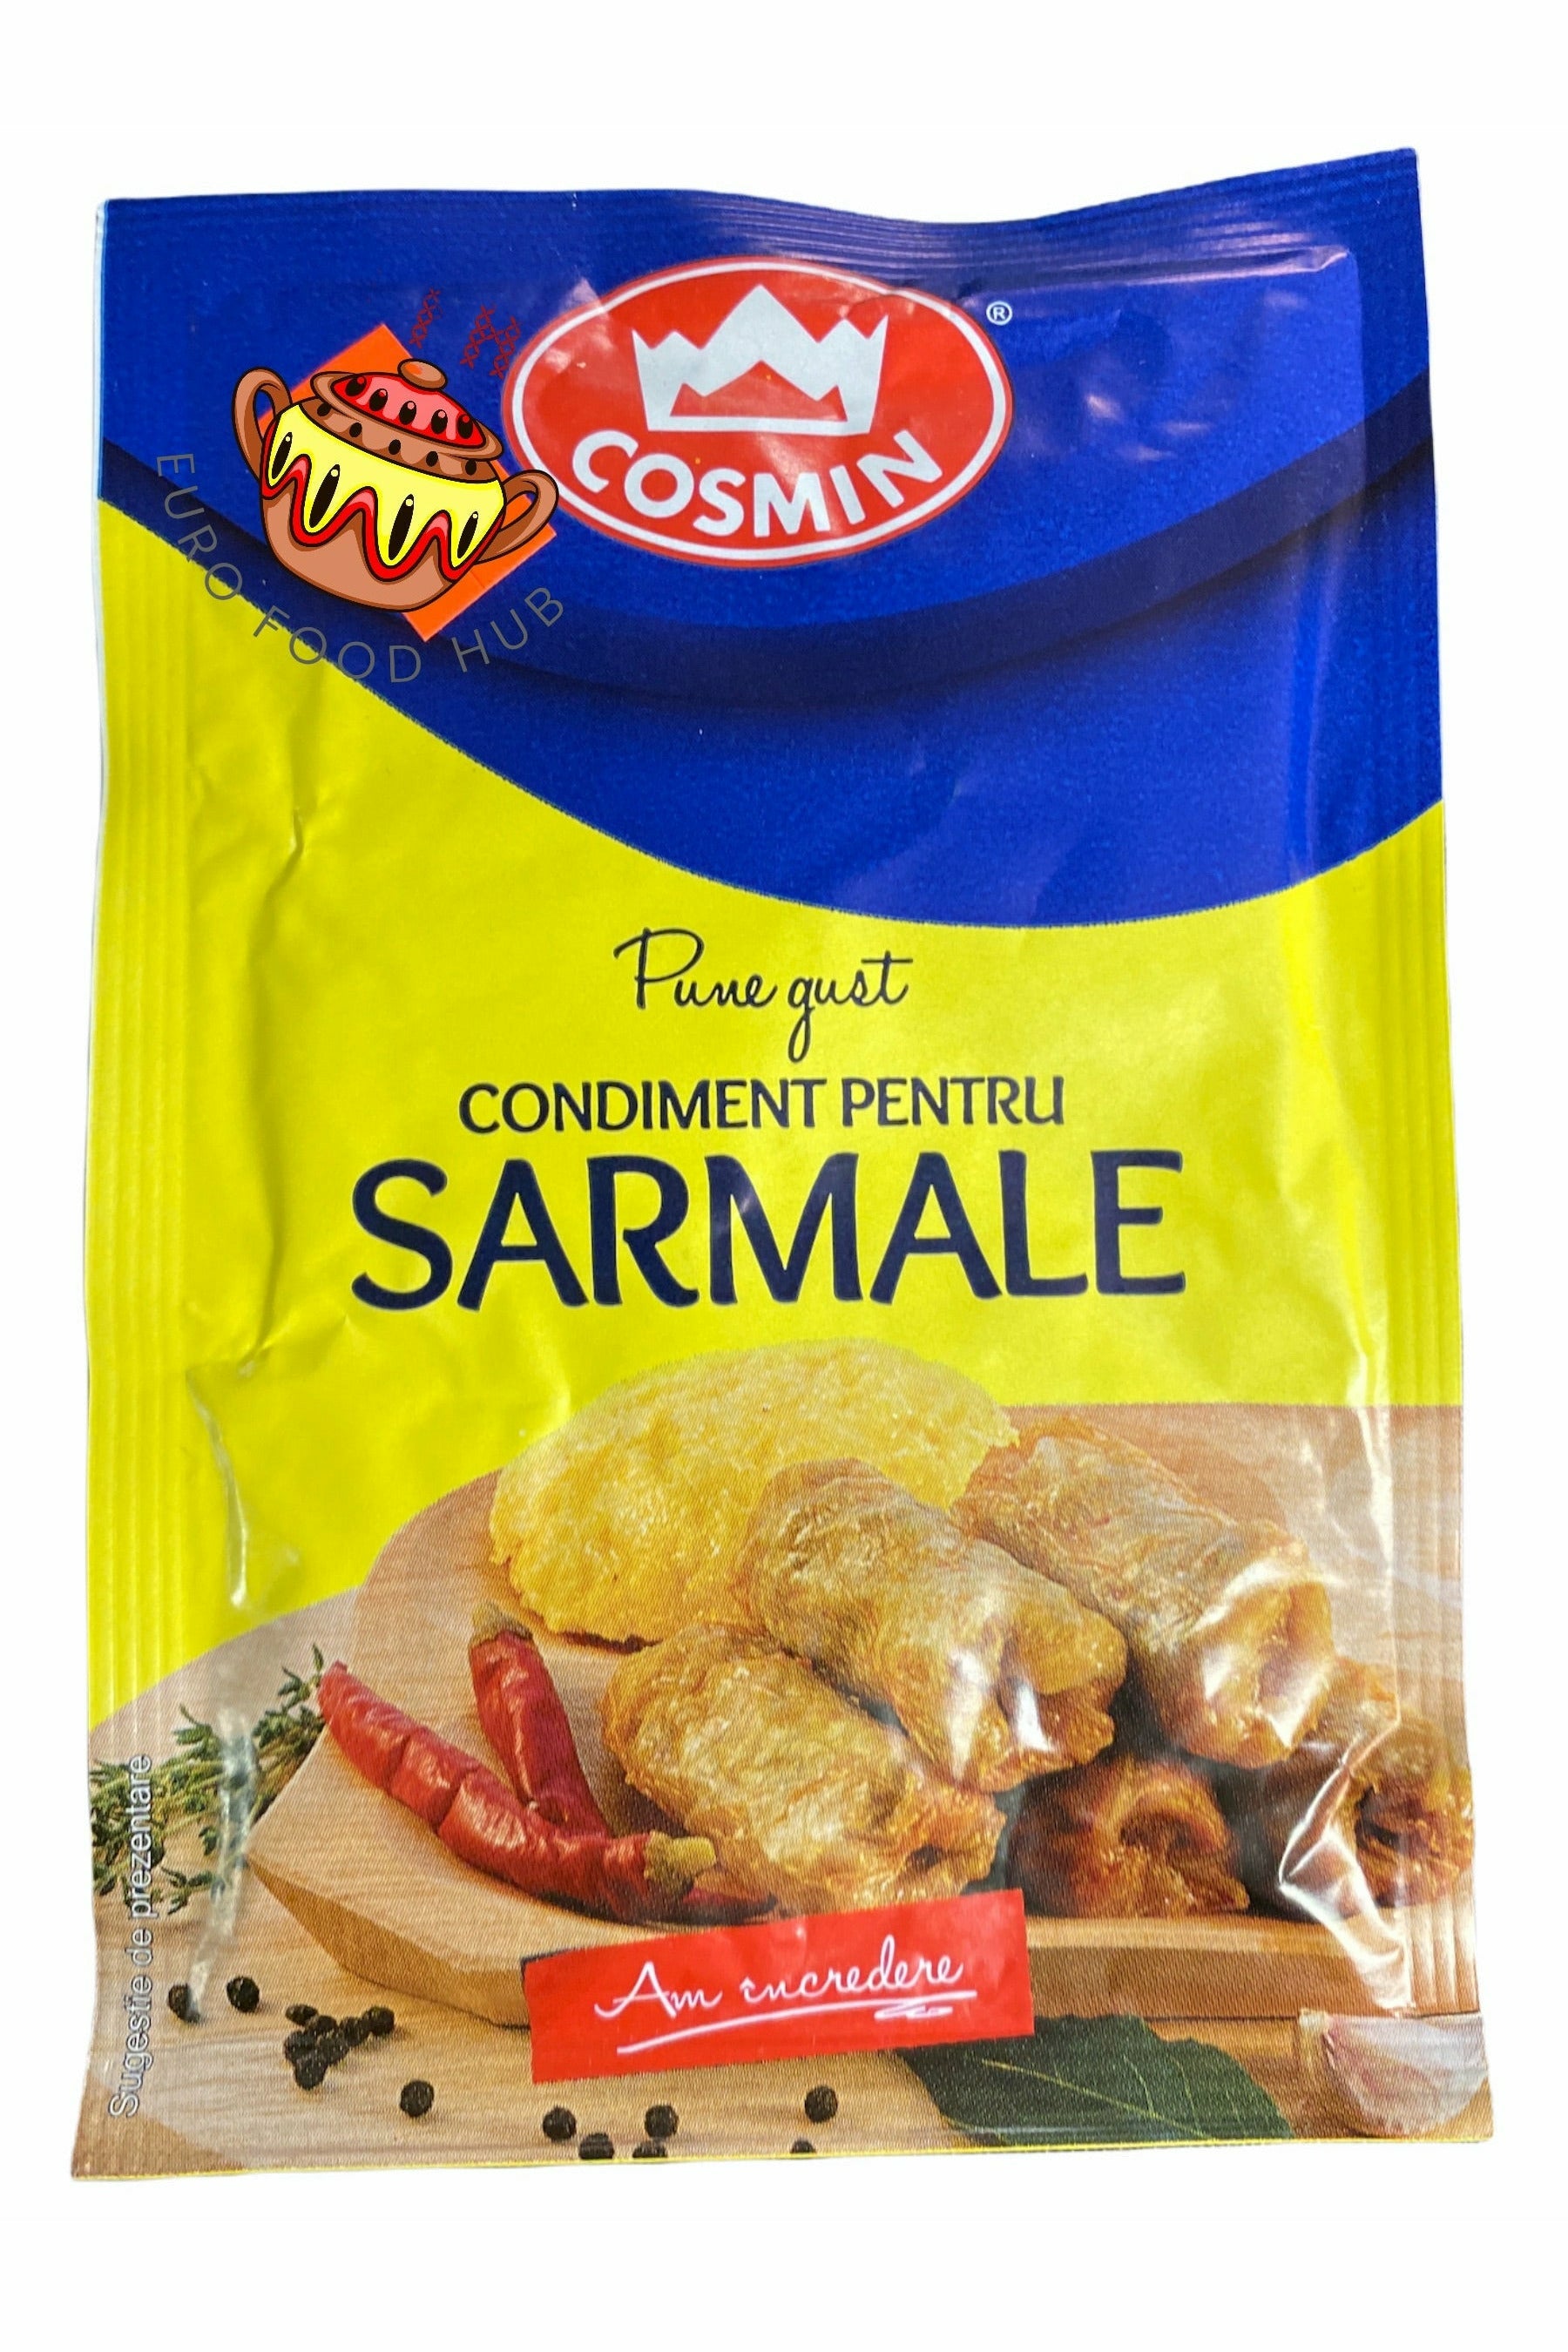 Sarmale - Seasoning Mix for Cabbage Rolls - Cosmin